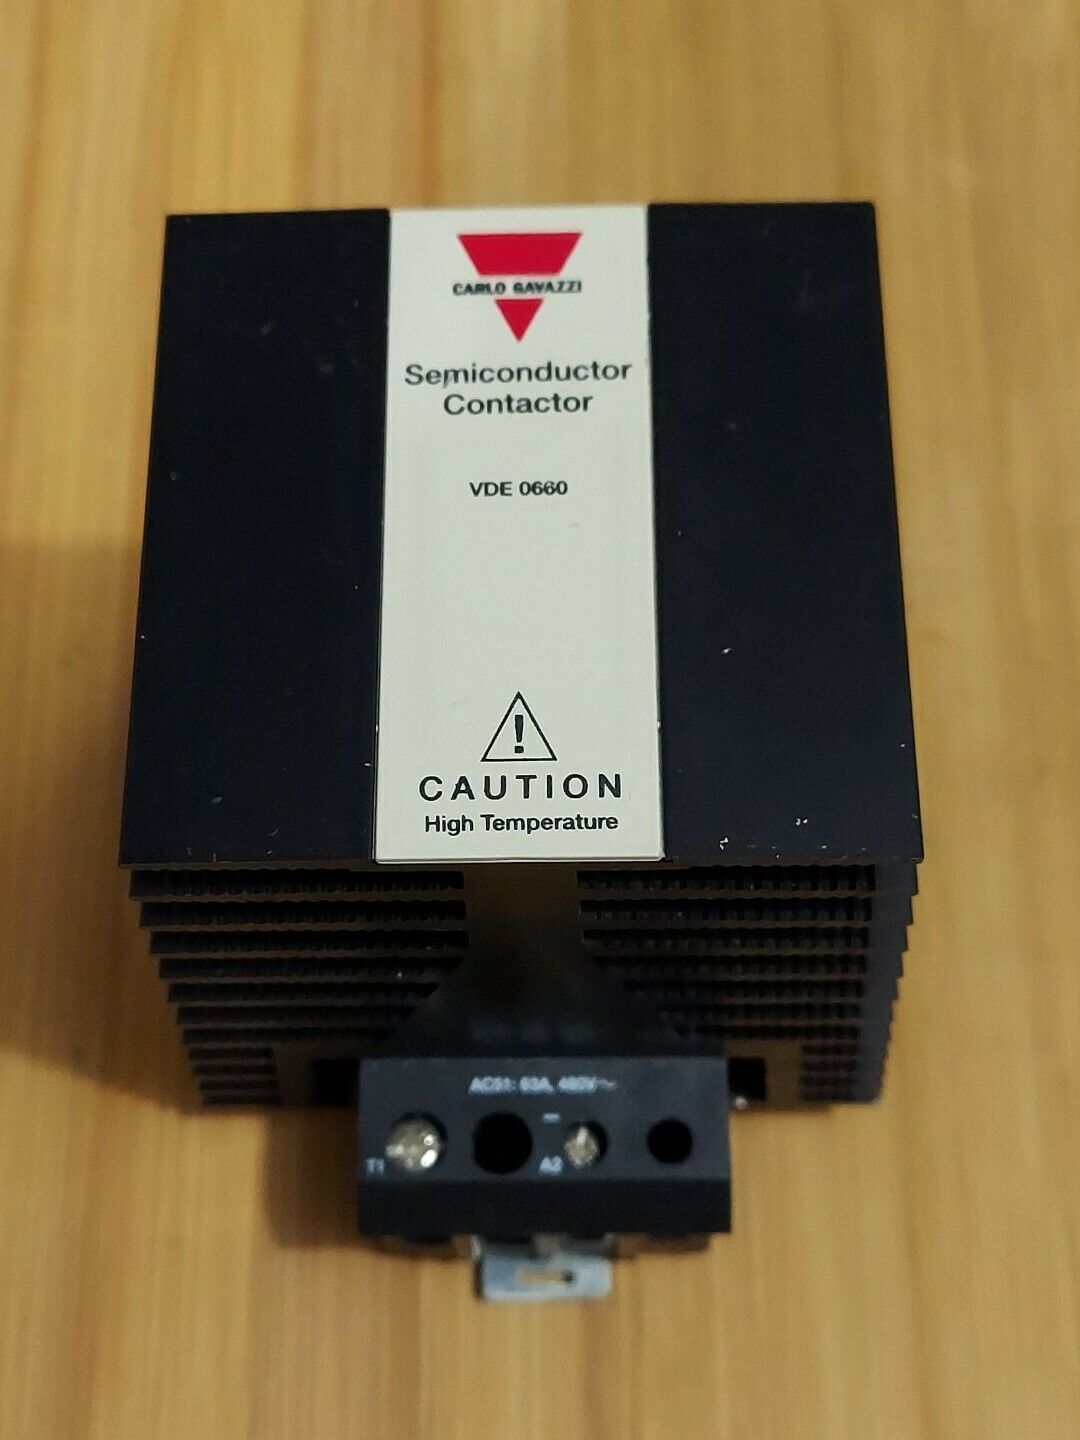 Carlo Gavazzi RN1A48D63 Solid State Relay 5 to 32 VDC AC51:63A, 480VAC (GR127) - 0